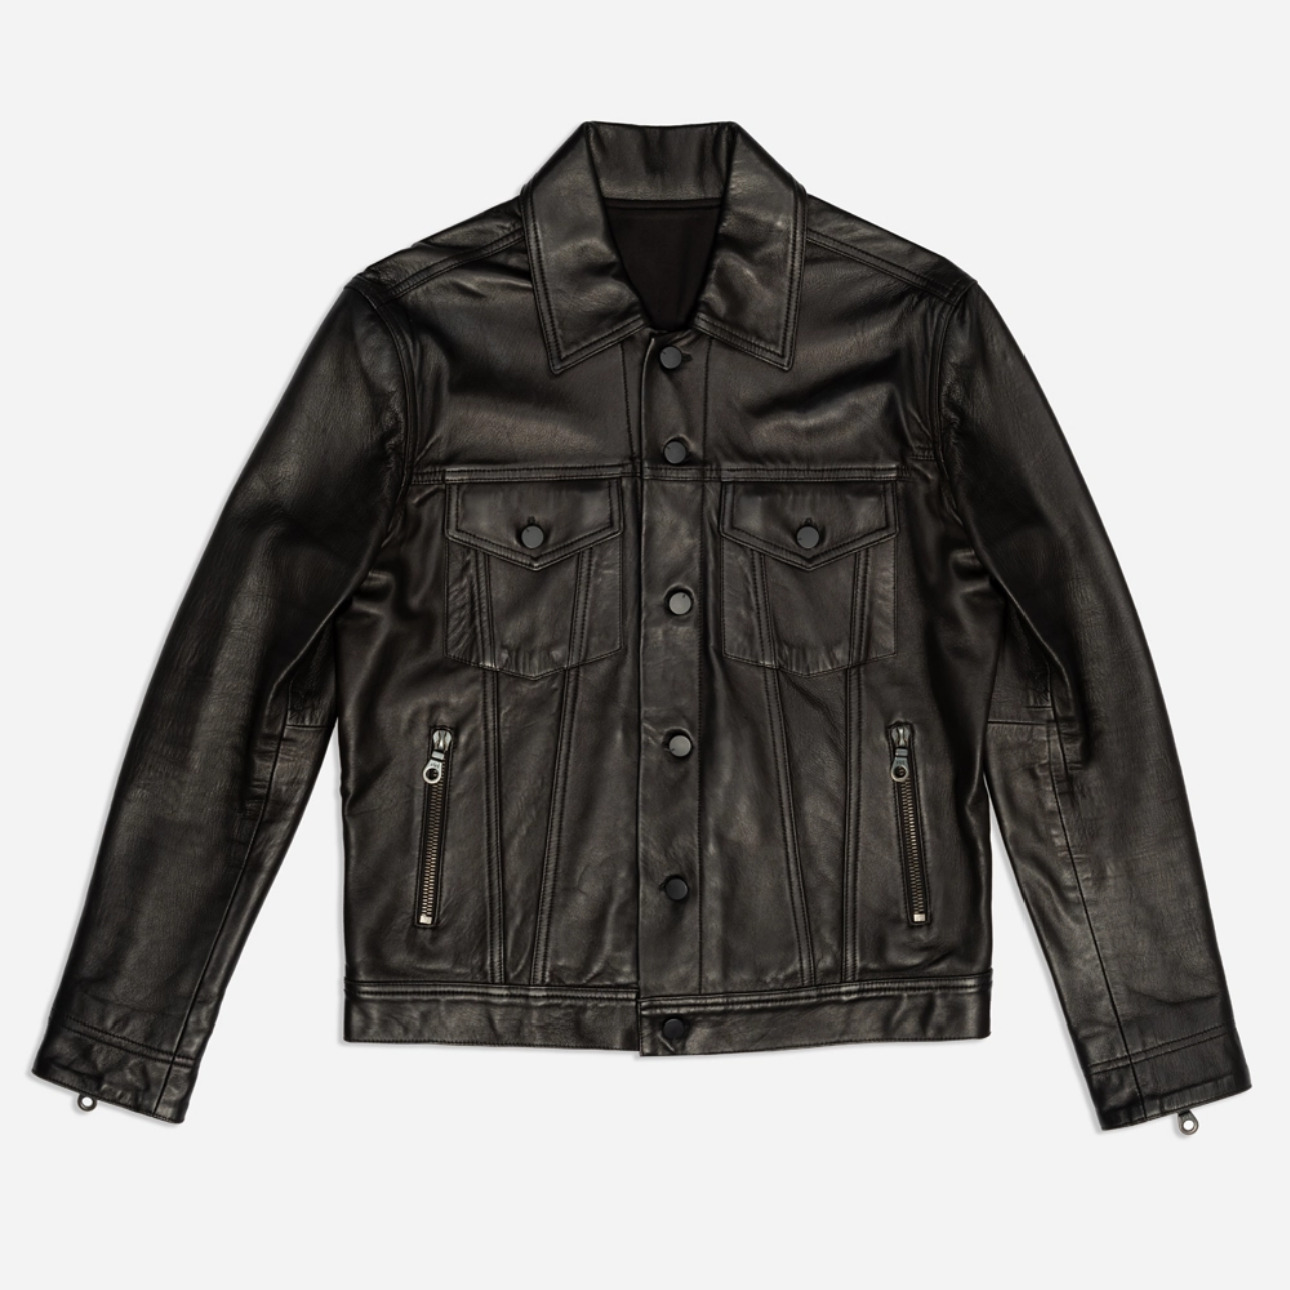 Black leather jacket with a classic design, featuring a collar, two chest pockets, and zipper details, laid flat on a white background — A Los Angeles photography studio portfolio